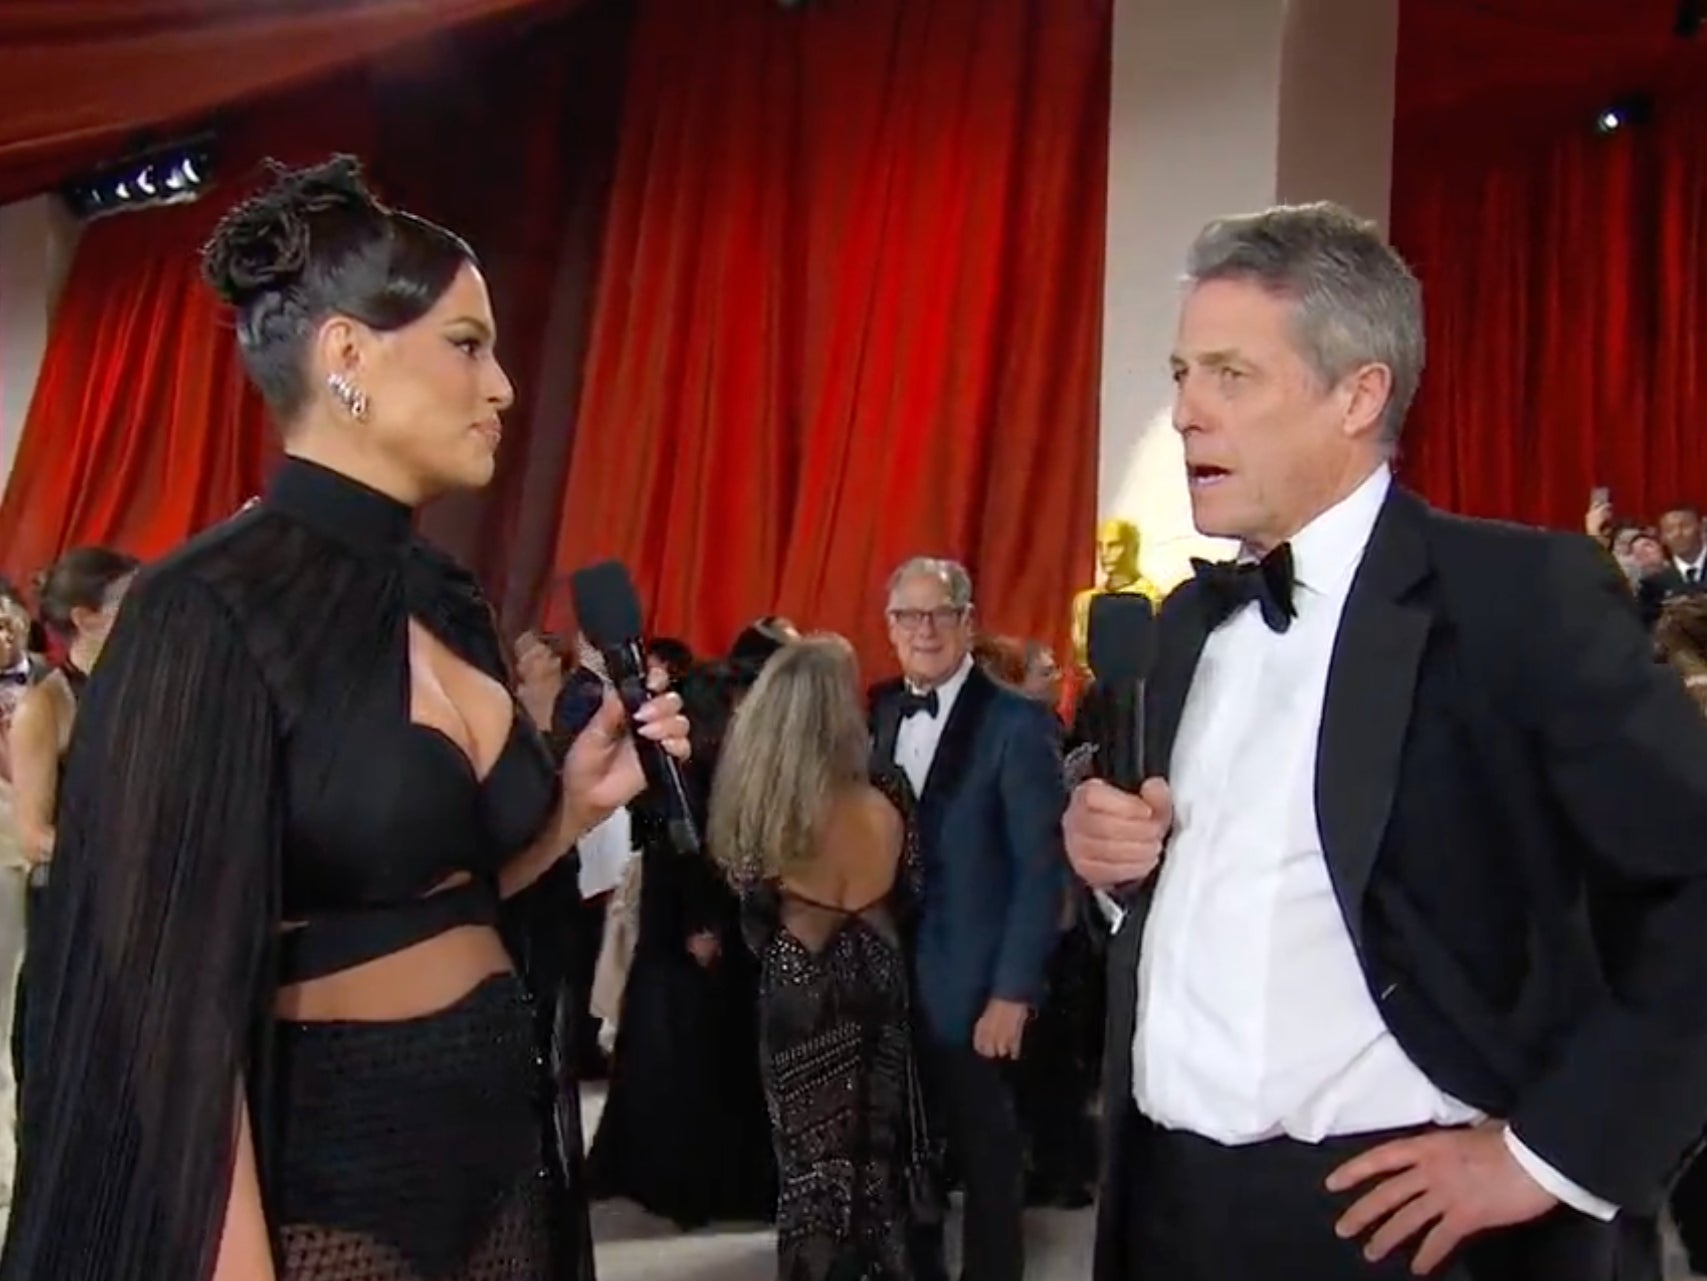 Hugh Grant accused of rude behaviour to Ashley Graham during Oscars red carpet interview | The Independent